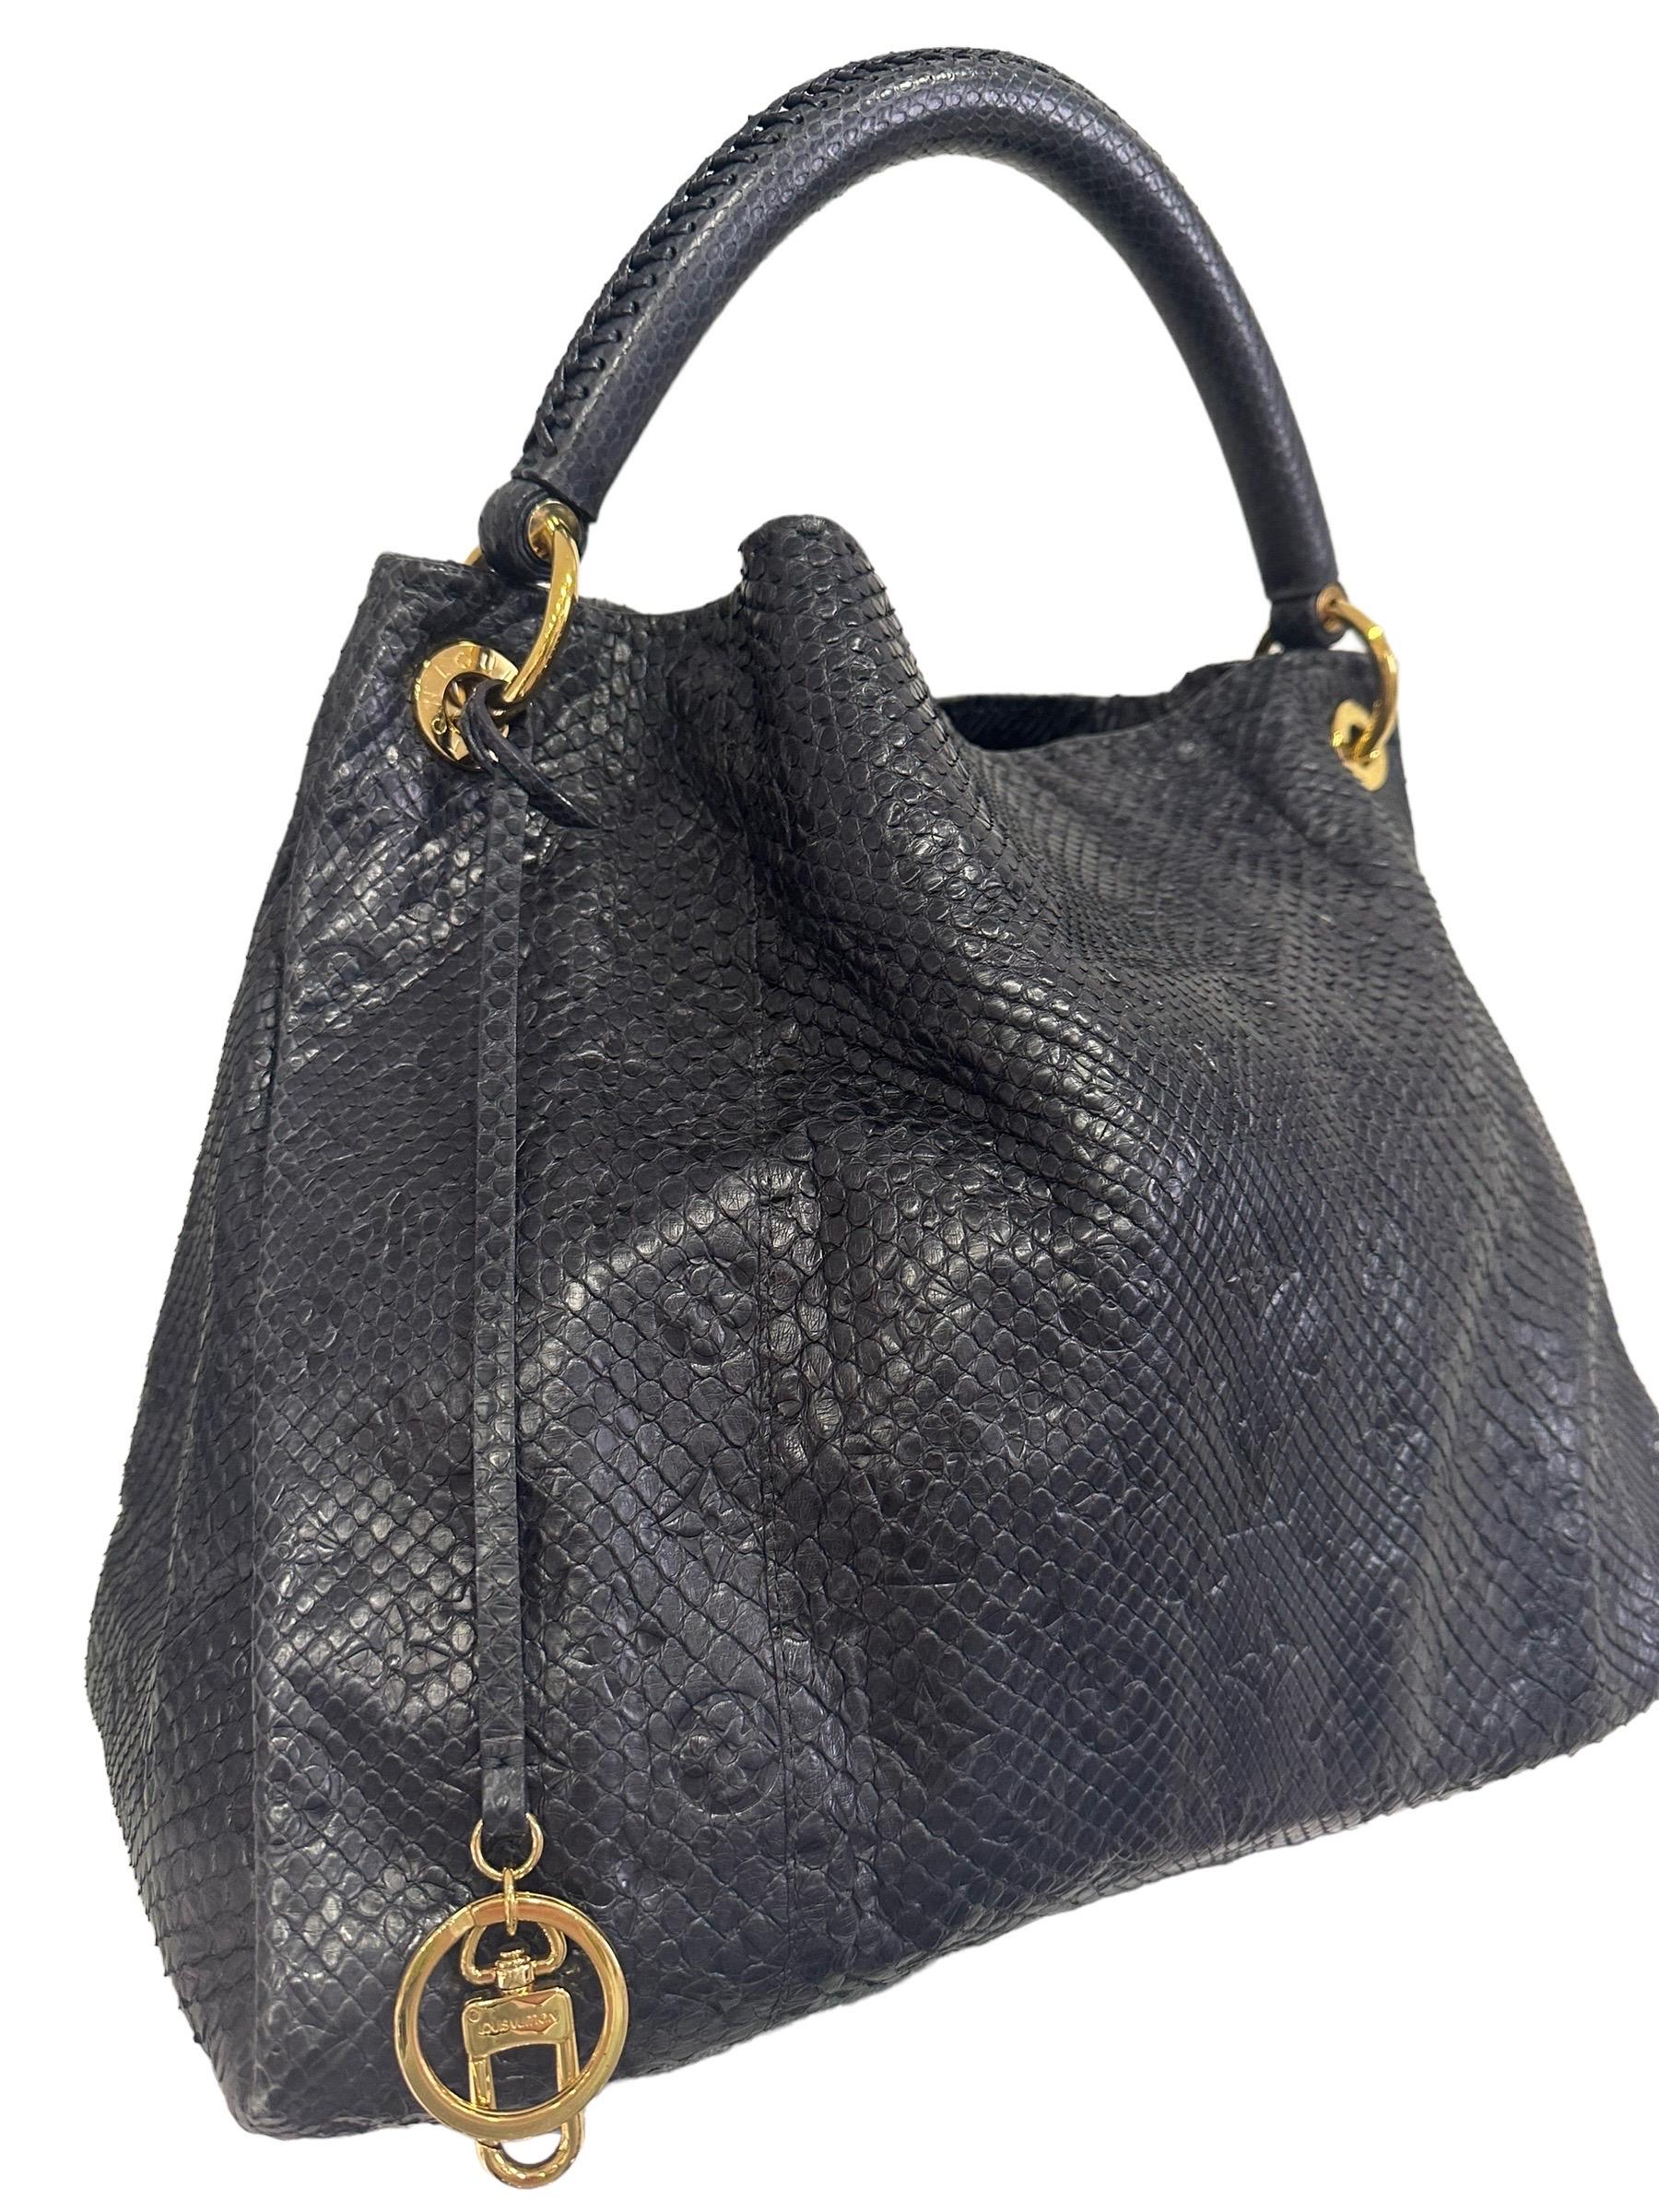 Louis Vuitton bag, Artsy model, size GM, limited edition, made of blue leather with gold hardware. It is not equipped with any closure, internally lined in smooth blue leather, very roomy. Equipped with a single handle in woven rigid leather and